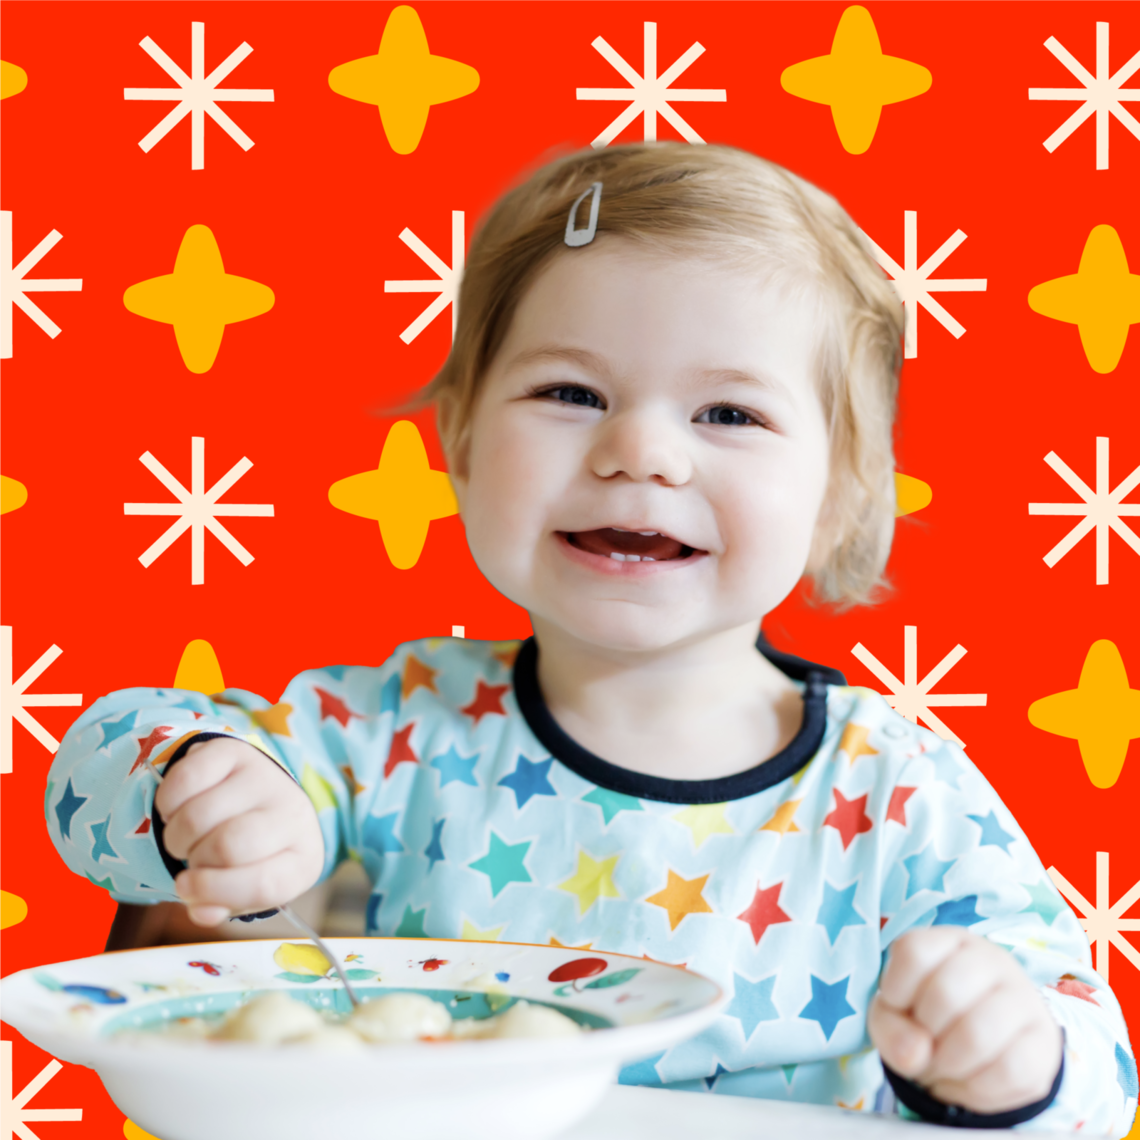 Toddler eating a bowl of cereal smiling in front of a project bread red and star background